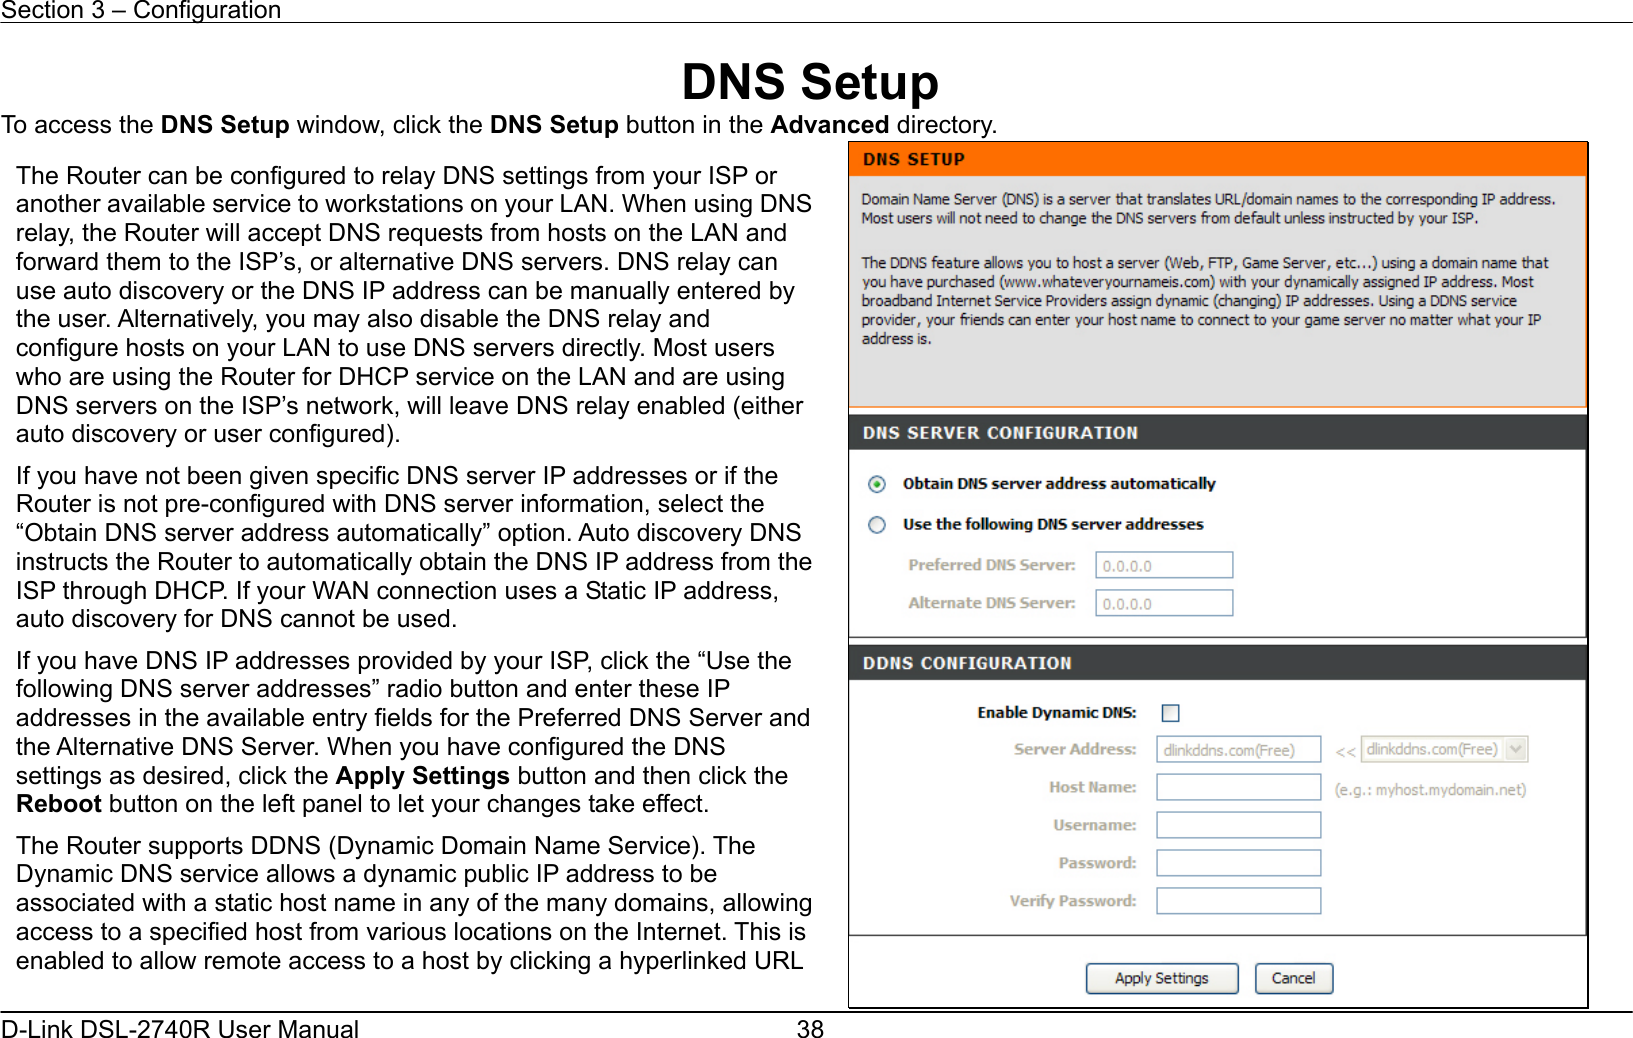 Section 3 – Configuration   D-Link DSL-2740R User Manual  38DNS Setup To access the DNS Setup window, click the DNS Setup button in the Advanced directory.  The Router can be configured to relay DNS settings from your ISP or another available service to workstations on your LAN. When using DNSrelay, the Router will accept DNS requests from hosts on the LAN and forward them to the ISP’s, or alternative DNS servers. DNS relay can use auto discovery or the DNS IP address can be manually entered by the user. Alternatively, you may also disable the DNS relay and configure hosts on your LAN to use DNS servers directly. Most users who are using the Router for DHCP service on the LAN and are using DNS servers on the ISP’s network, will leave DNS relay enabled (either auto discovery or user configured). If you have not been given specific DNS server IP addresses or if the Router is not pre-configured with DNS server information, select the “Obtain DNS server address automatically” option. Auto discovery DNS instructs the Router to automatically obtain the DNS IP address from theISP through DHCP. If your WAN connection uses a Static IP address, auto discovery for DNS cannot be used. If you have DNS IP addresses provided by your ISP, click the “Use the following DNS server addresses” radio button and enter these IP addresses in the available entry fields for the Preferred DNS Server and the Alternative DNS Server. When you have configured the DNS settings as desired, click the Apply Settings button and then click the Reboot button on the left panel to let your changes take effect. The Router supports DDNS (Dynamic Domain Name Service). The Dynamic DNS service allows a dynamic public IP address to be associated with a static host name in any of the many domains, allowing access to a specified host from various locations on the Internet. This is enabled to allow remote access to a host by clicking a hyperlinked URL 